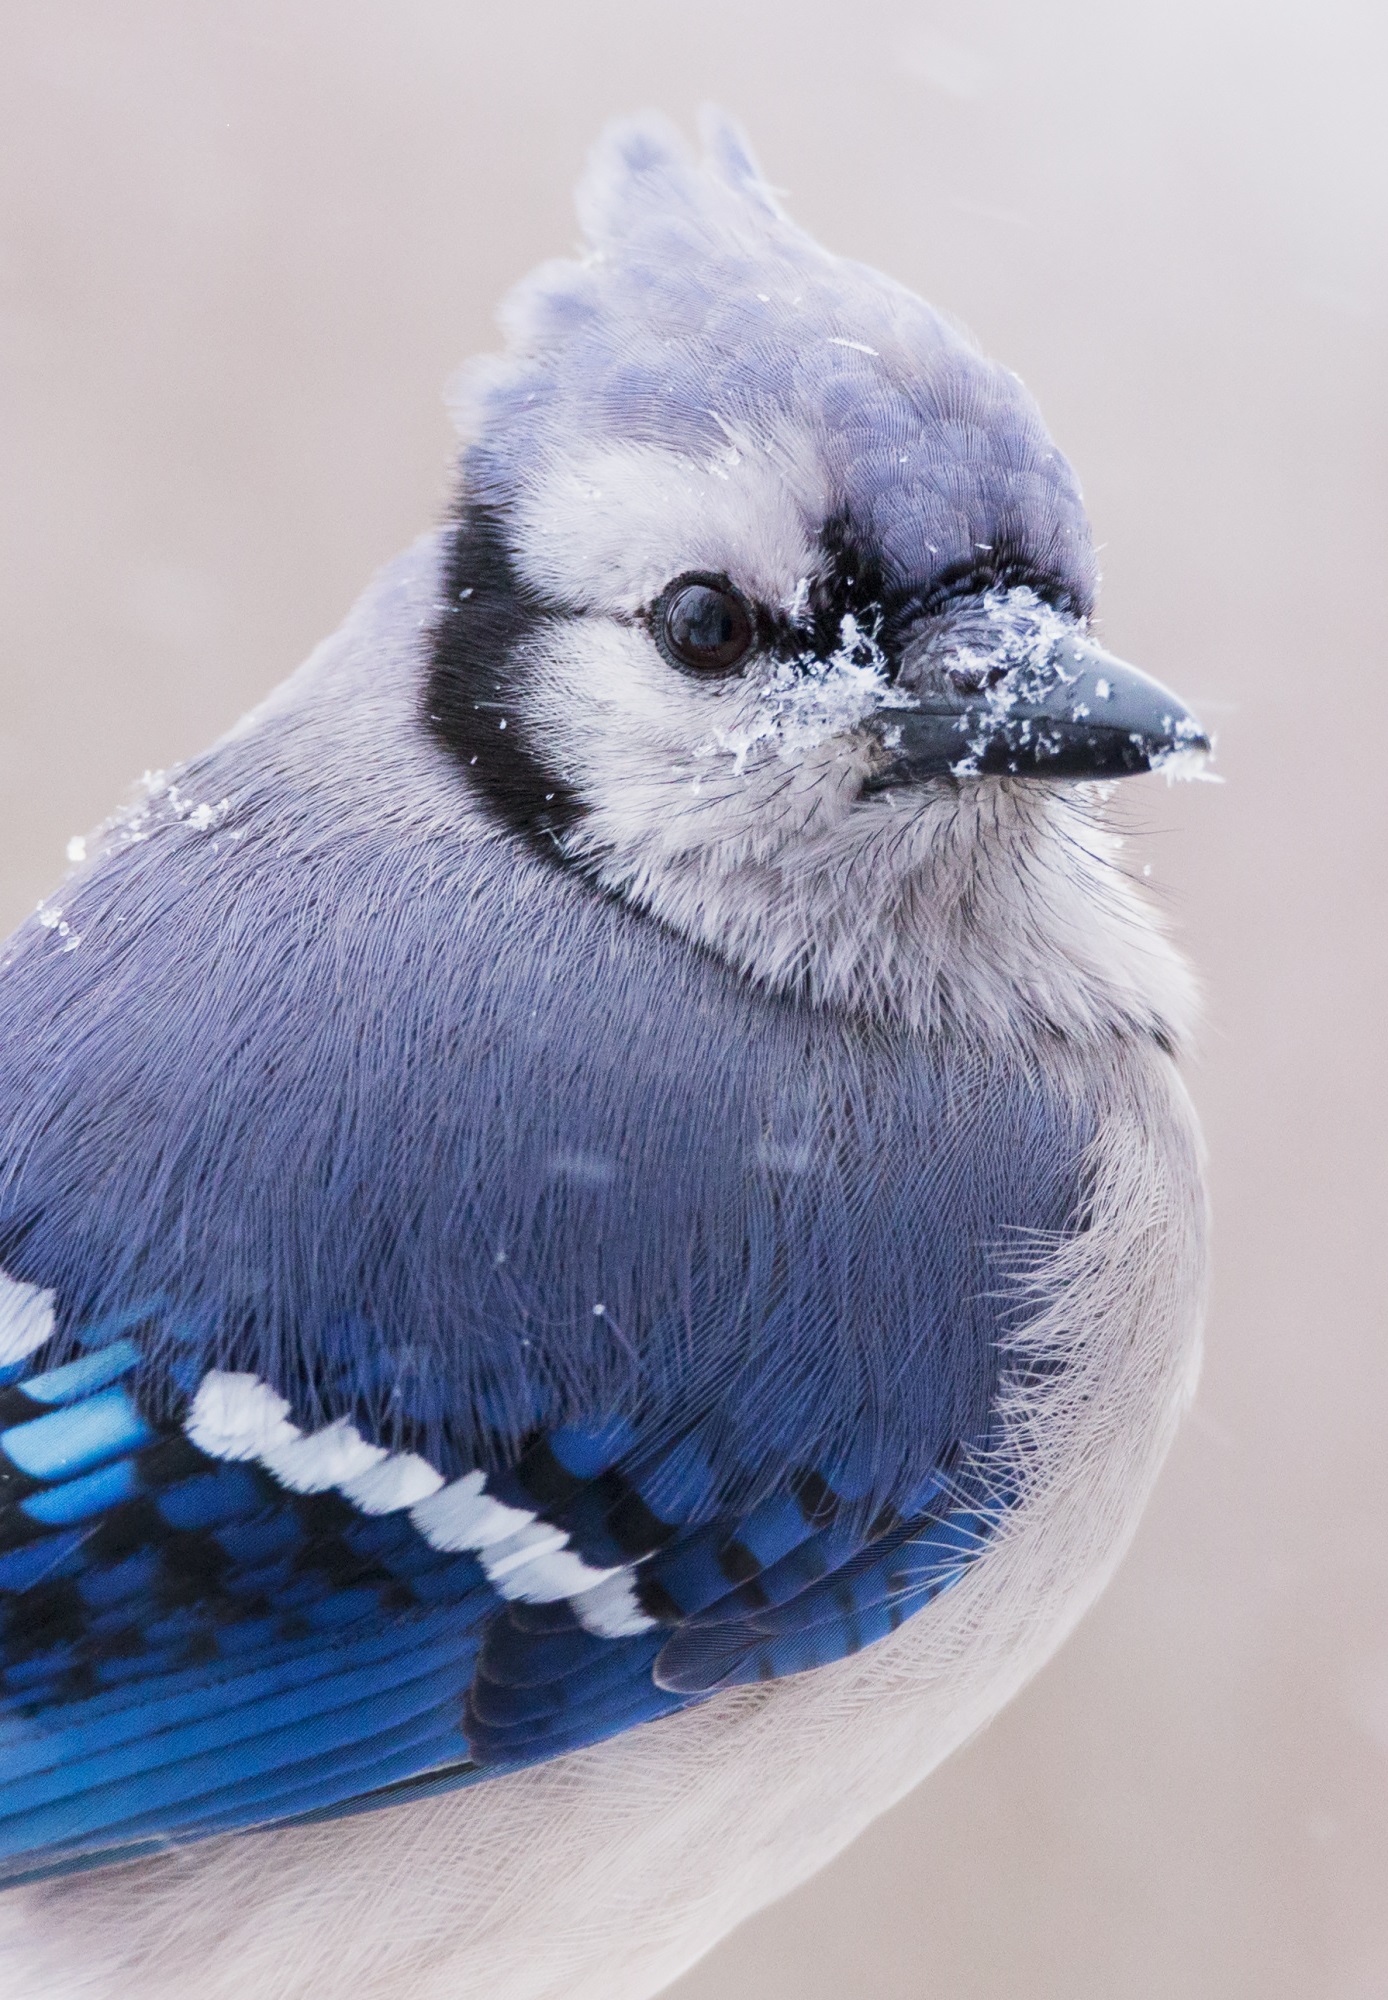 Ohio's blue jay feathers aren't really blue, here's how it tricks your eyes